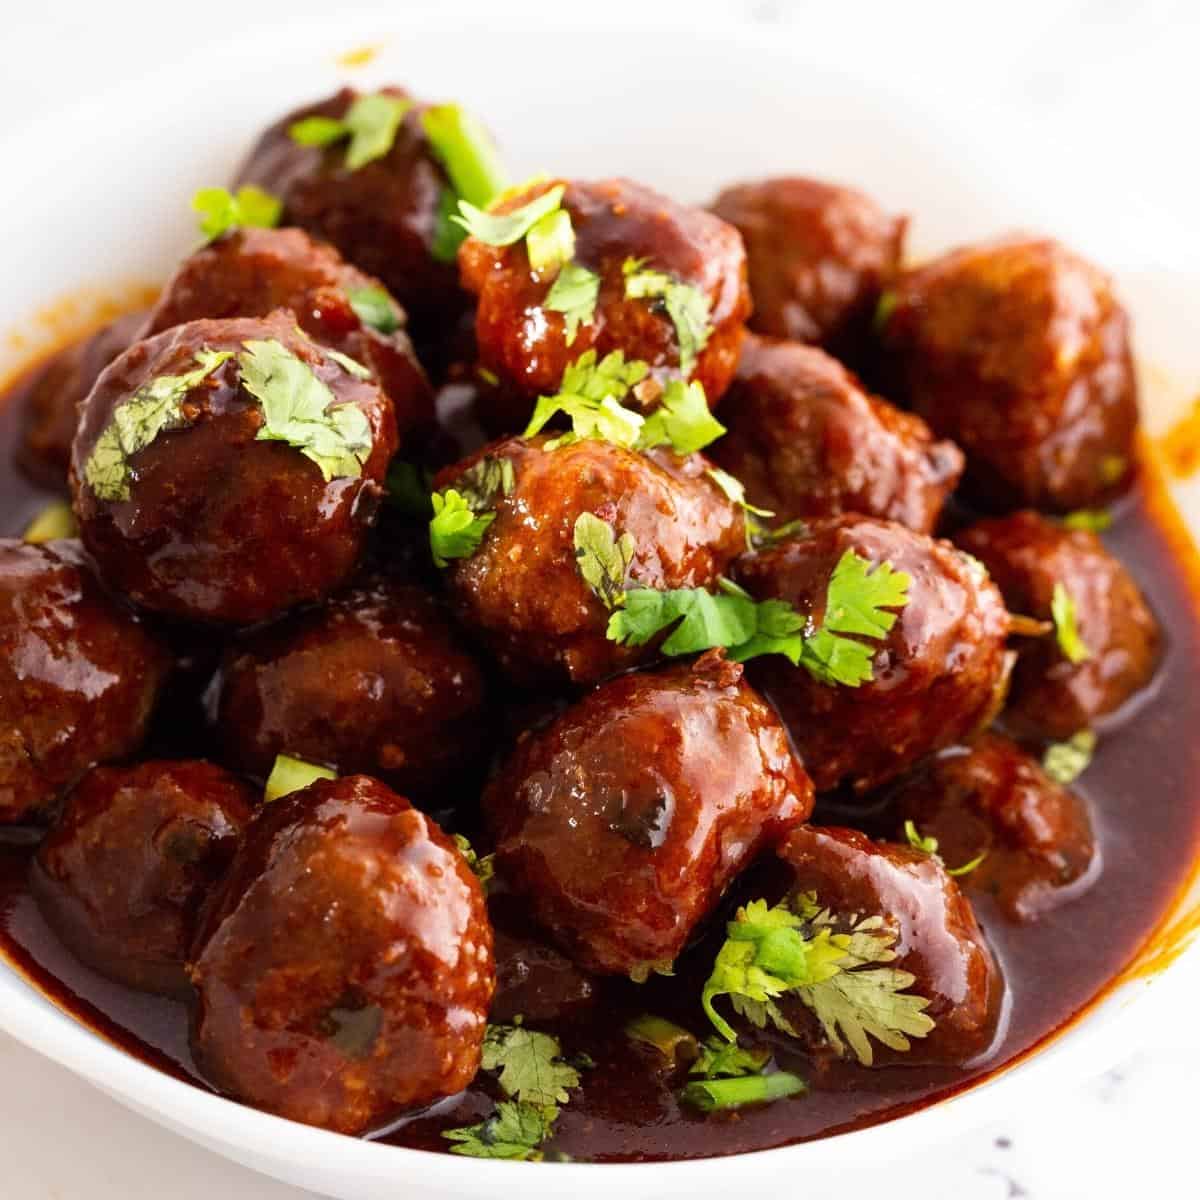 Meatballs in a bowl with sweet and sour sauce.